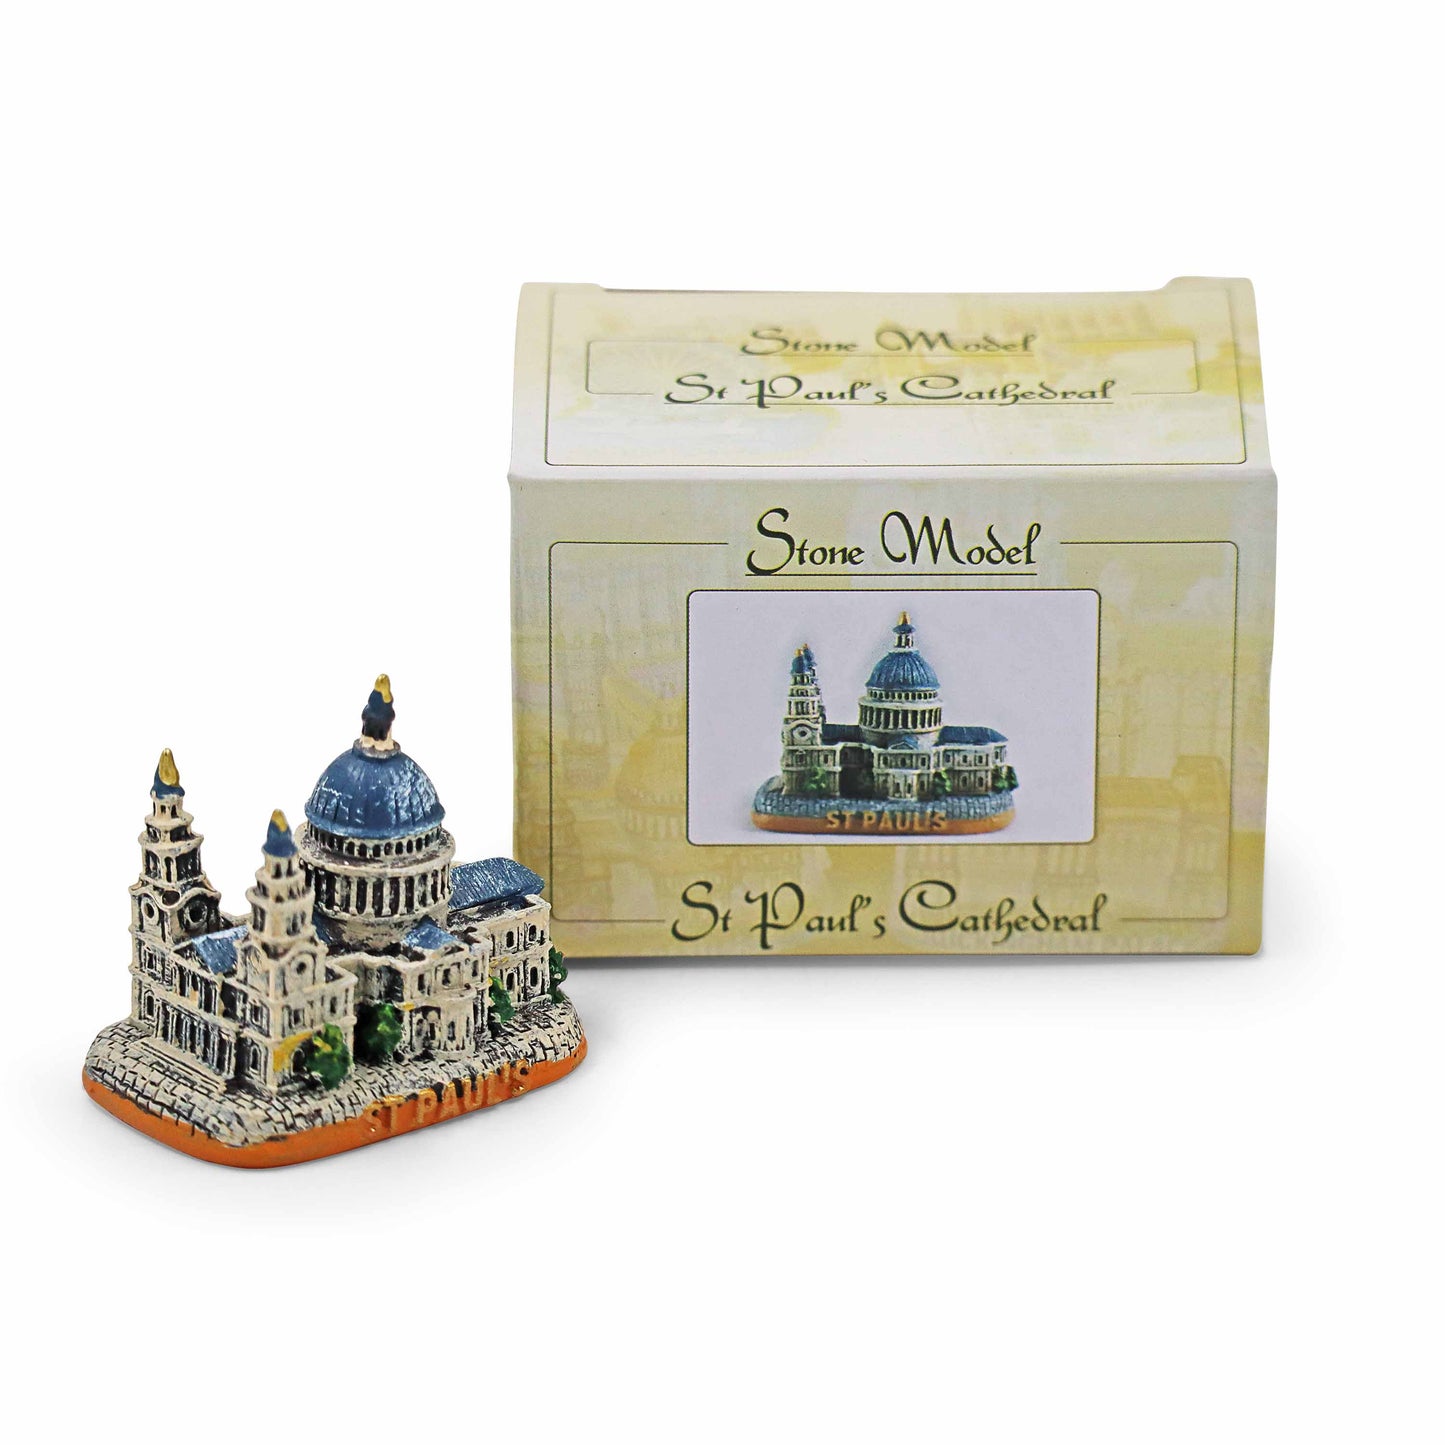 St Paul's Cathedral - Mini Stone Model - British Souvenirs & Gifts